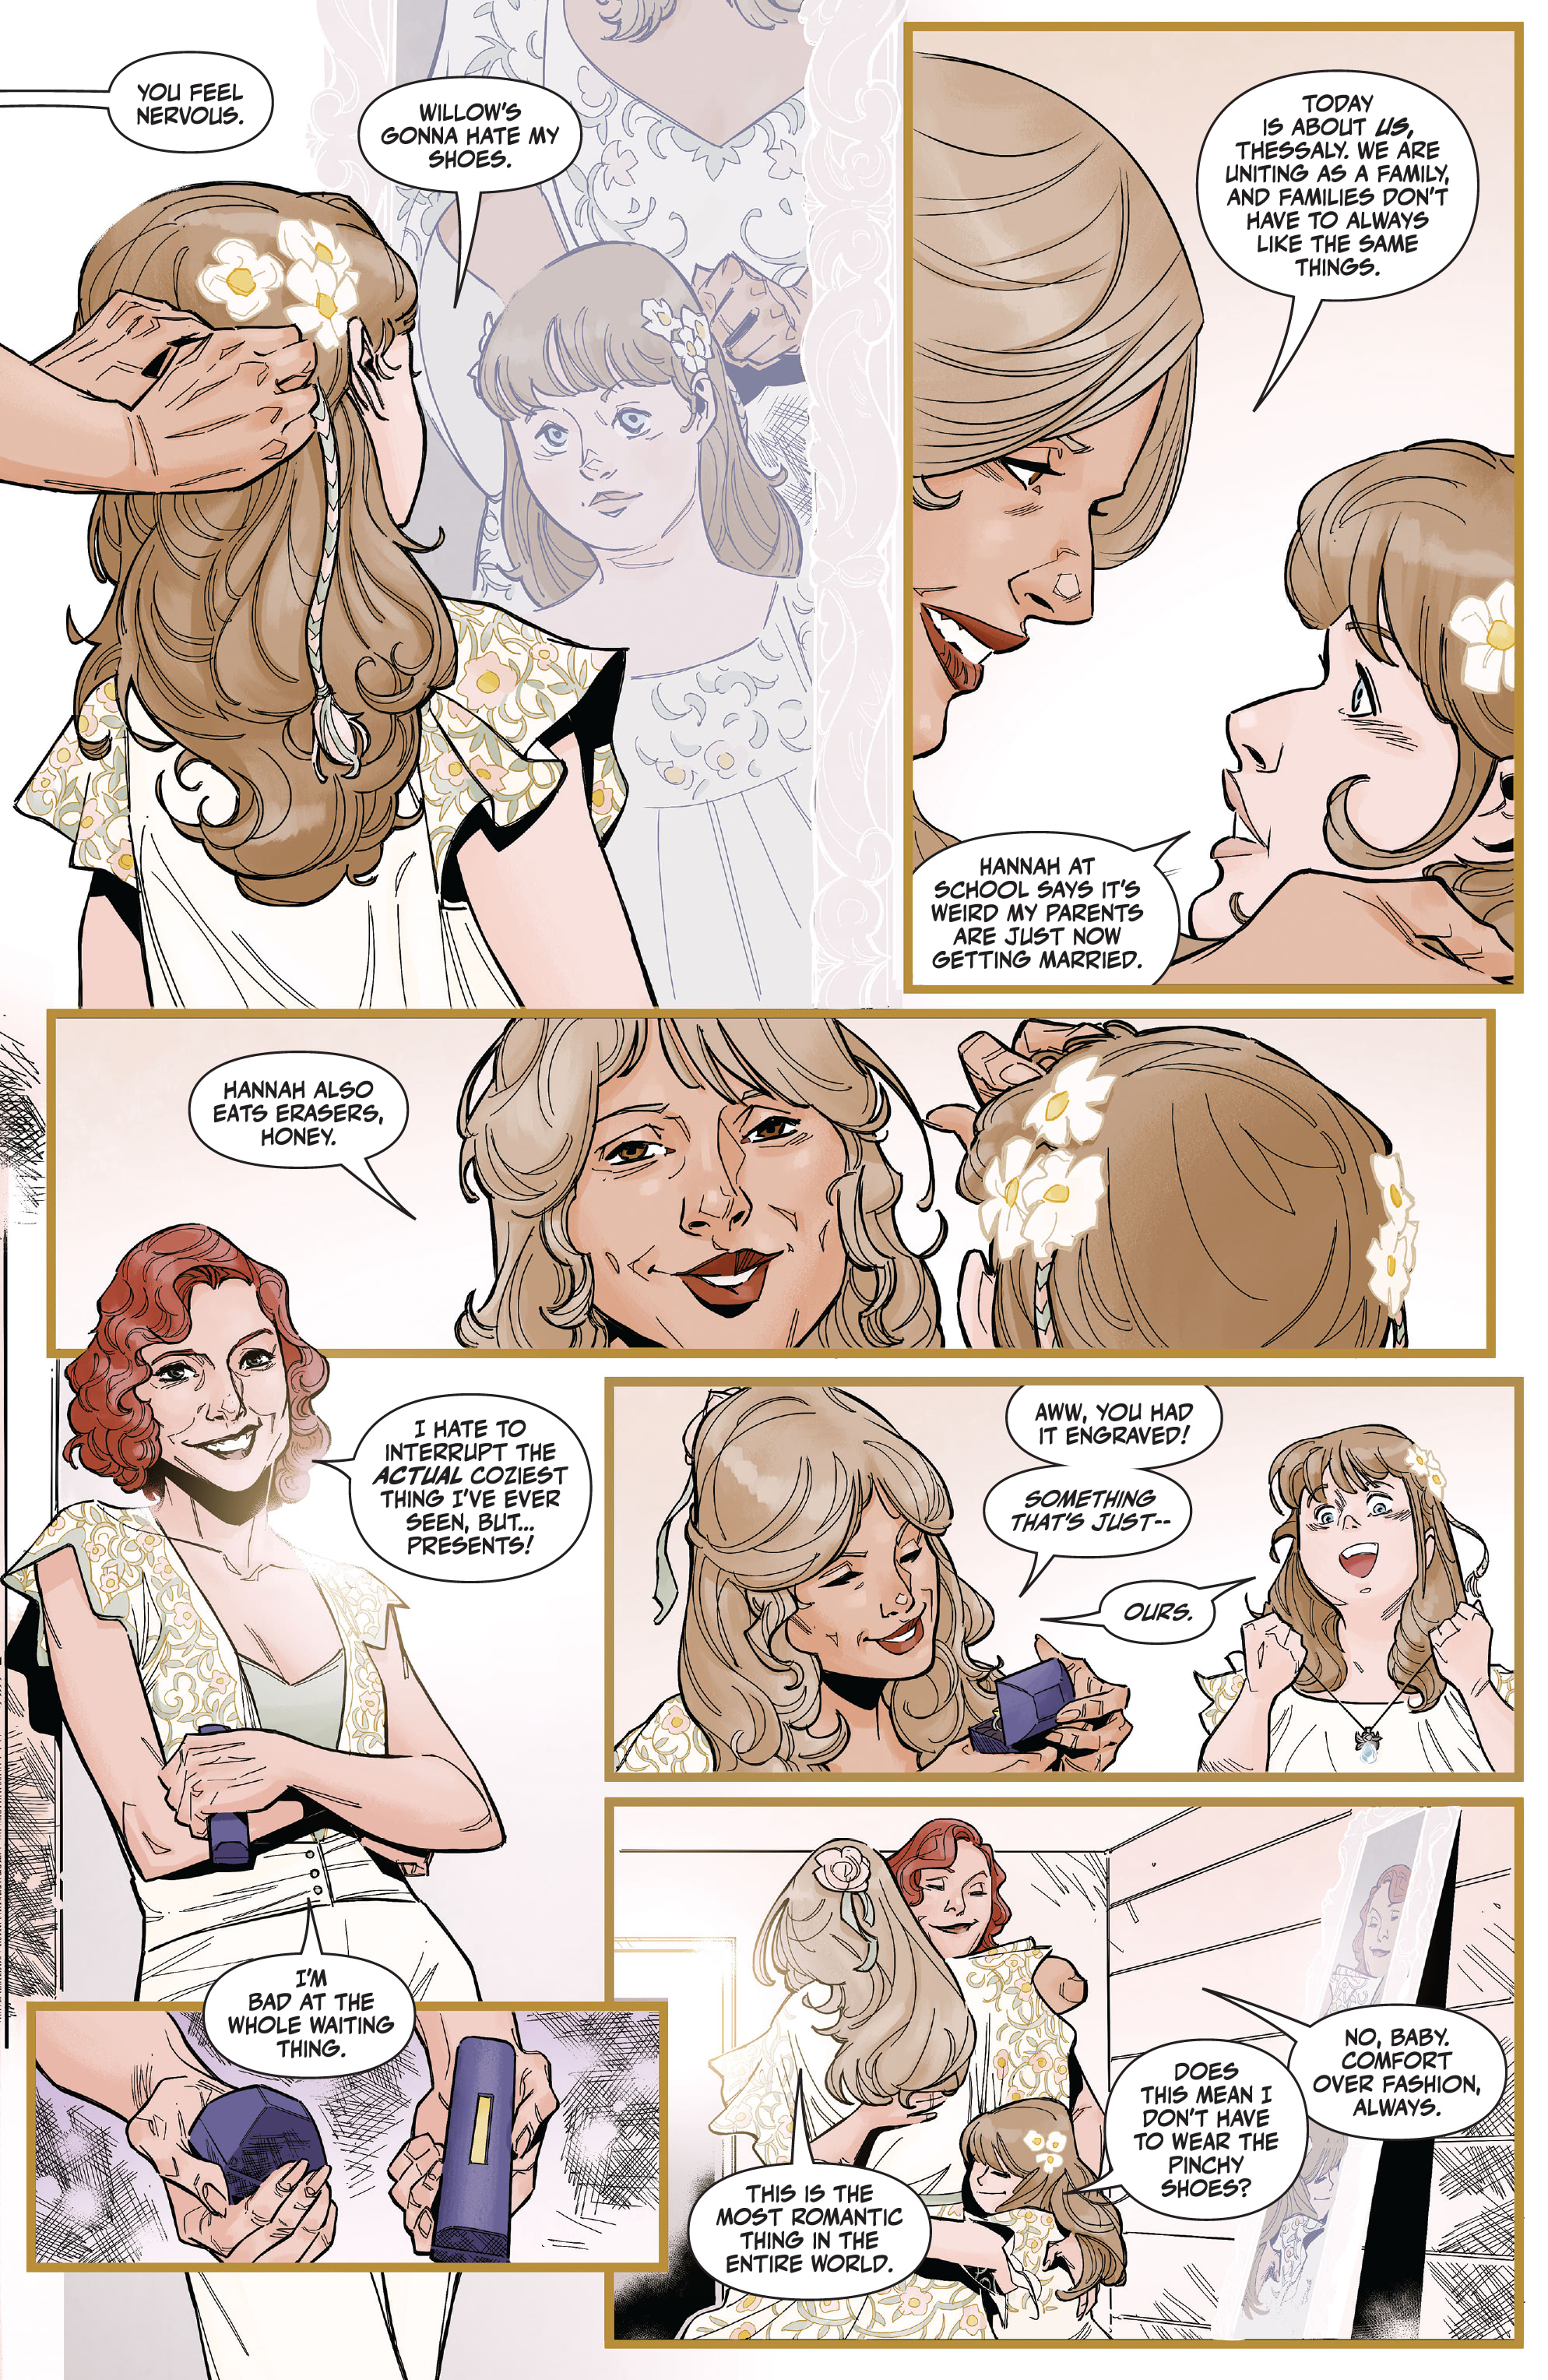 Buffy the Last Vampire Slayer (2021-): Chapter 2 - Page 3